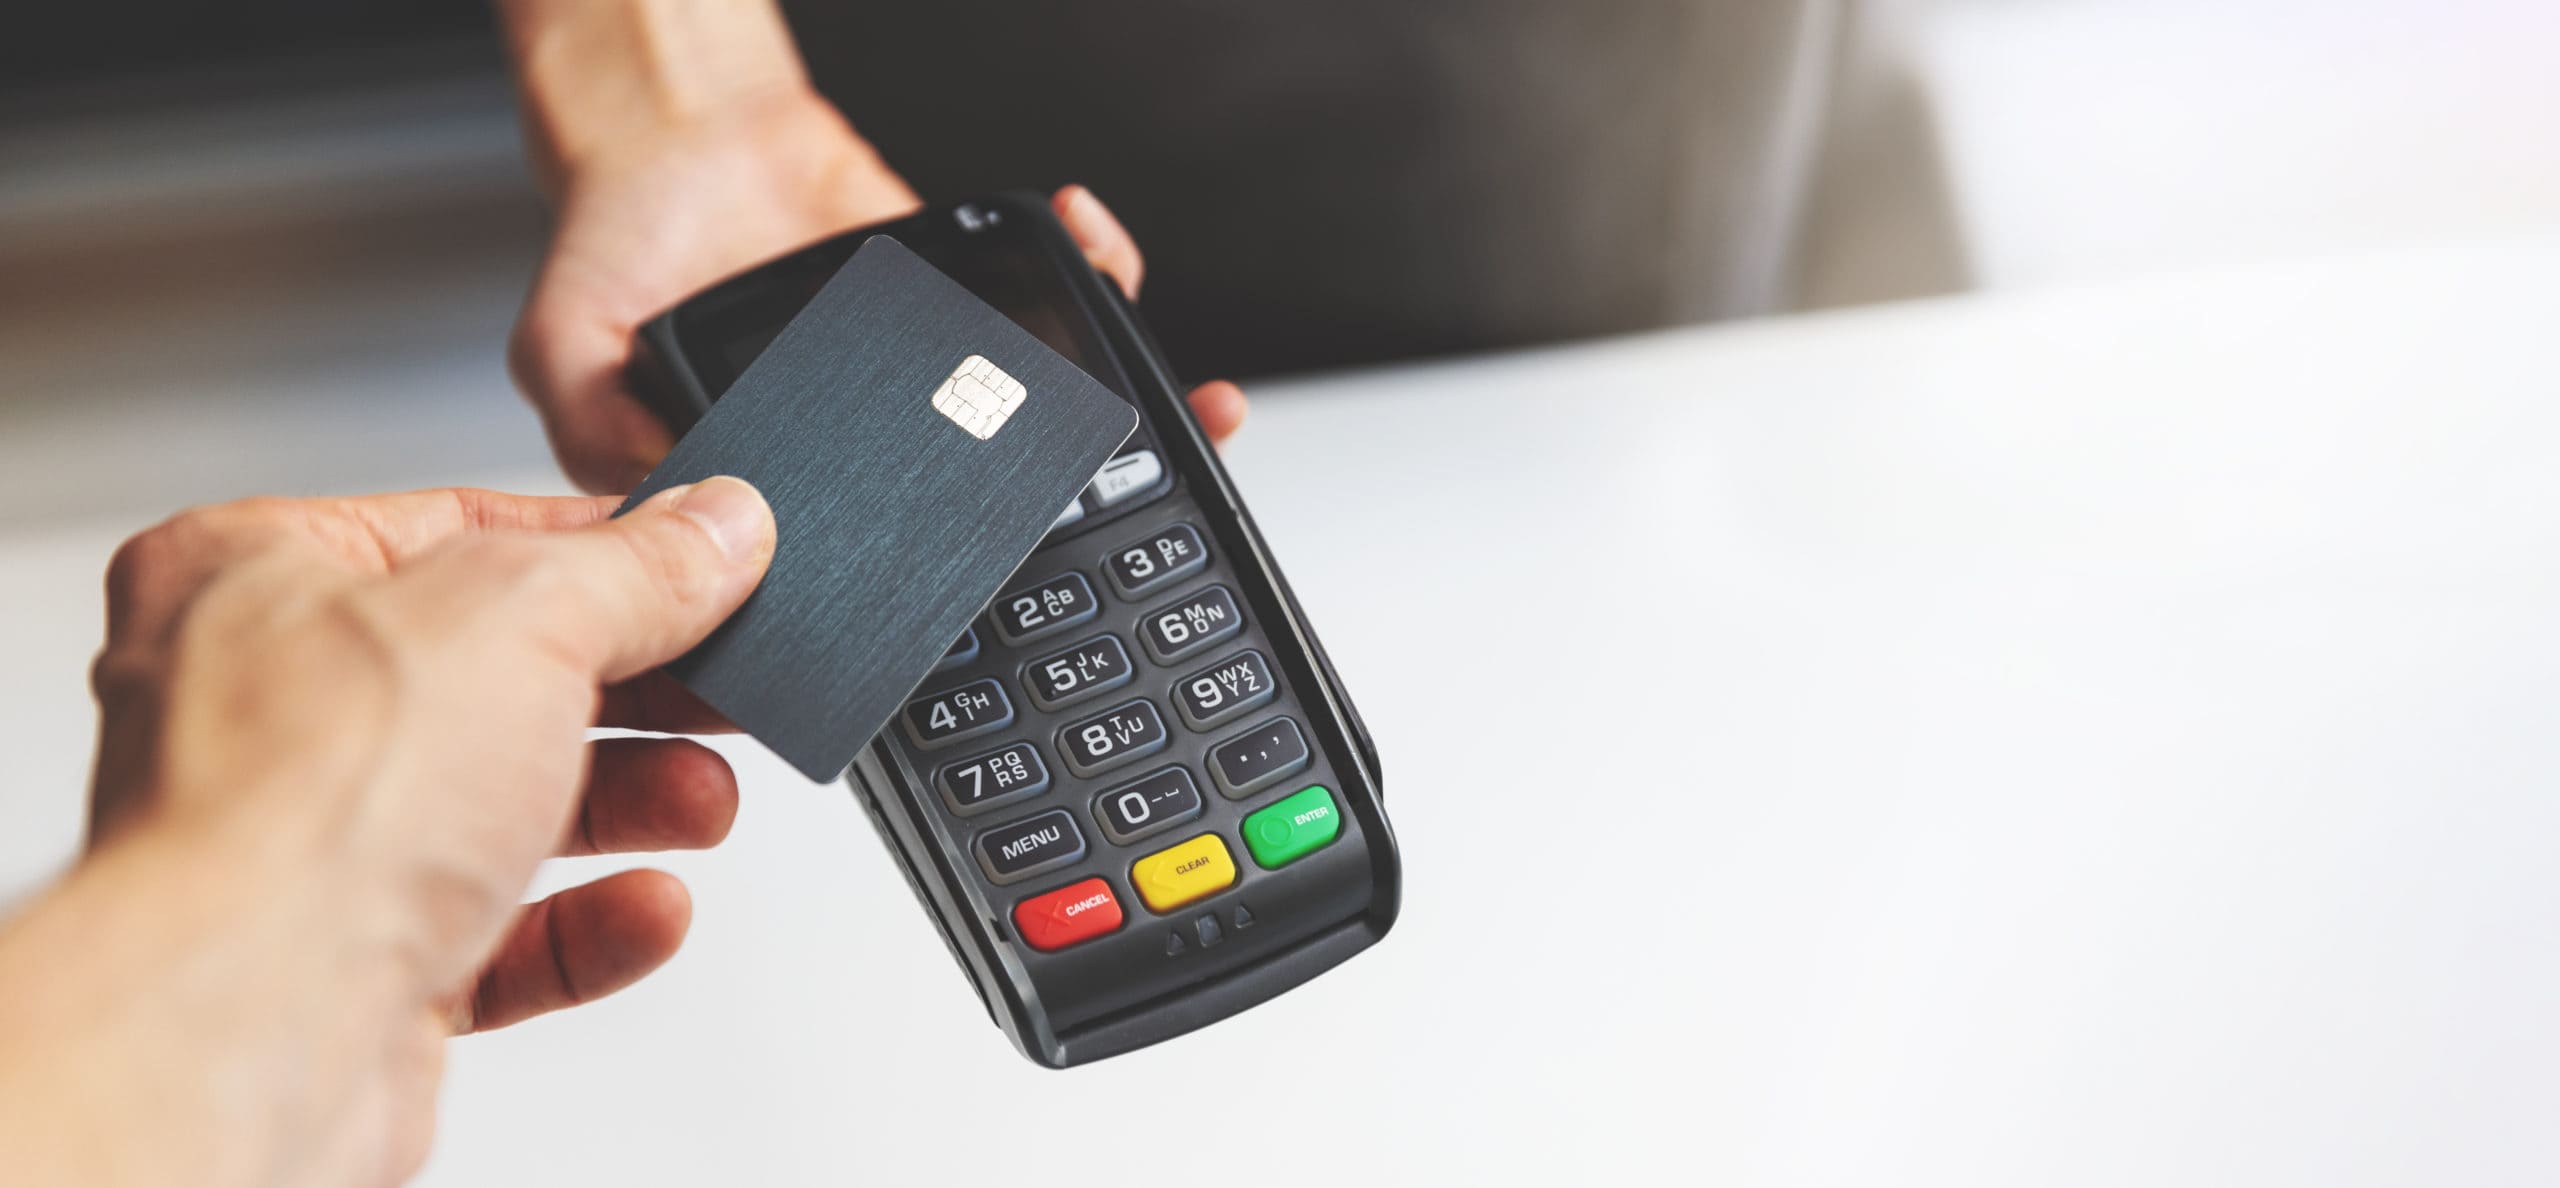 Payment Options - nfc contactless payment by credit card and pos terminal. copy space